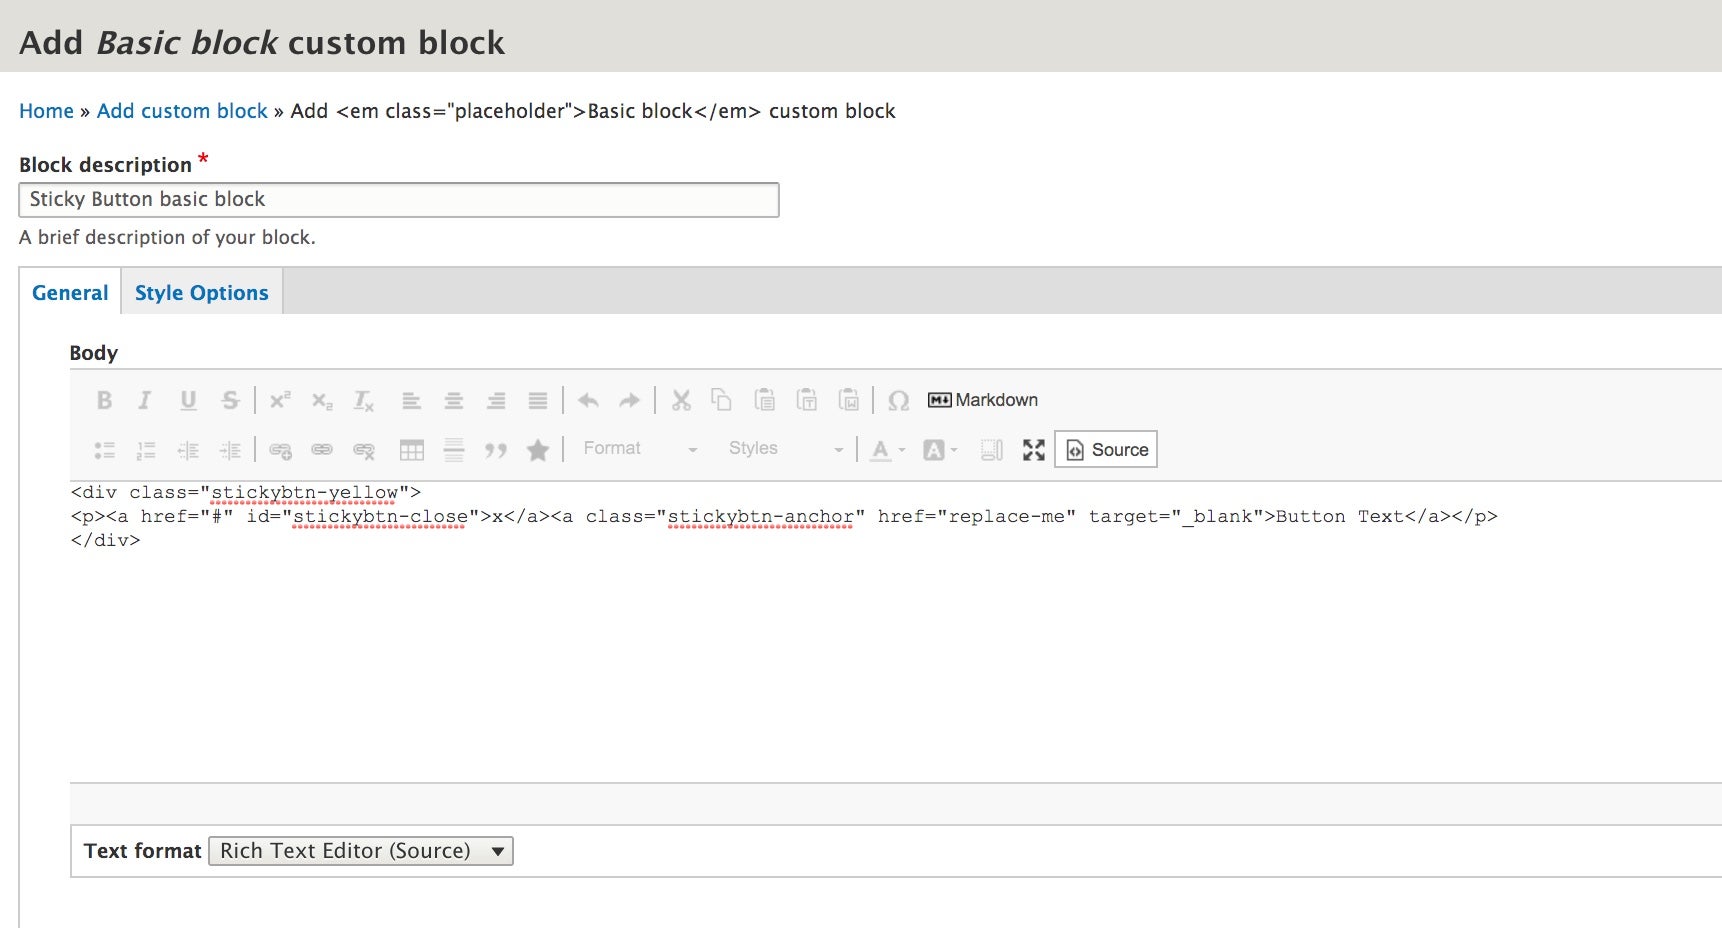 creating a basic block for a sticky button - this is the source code